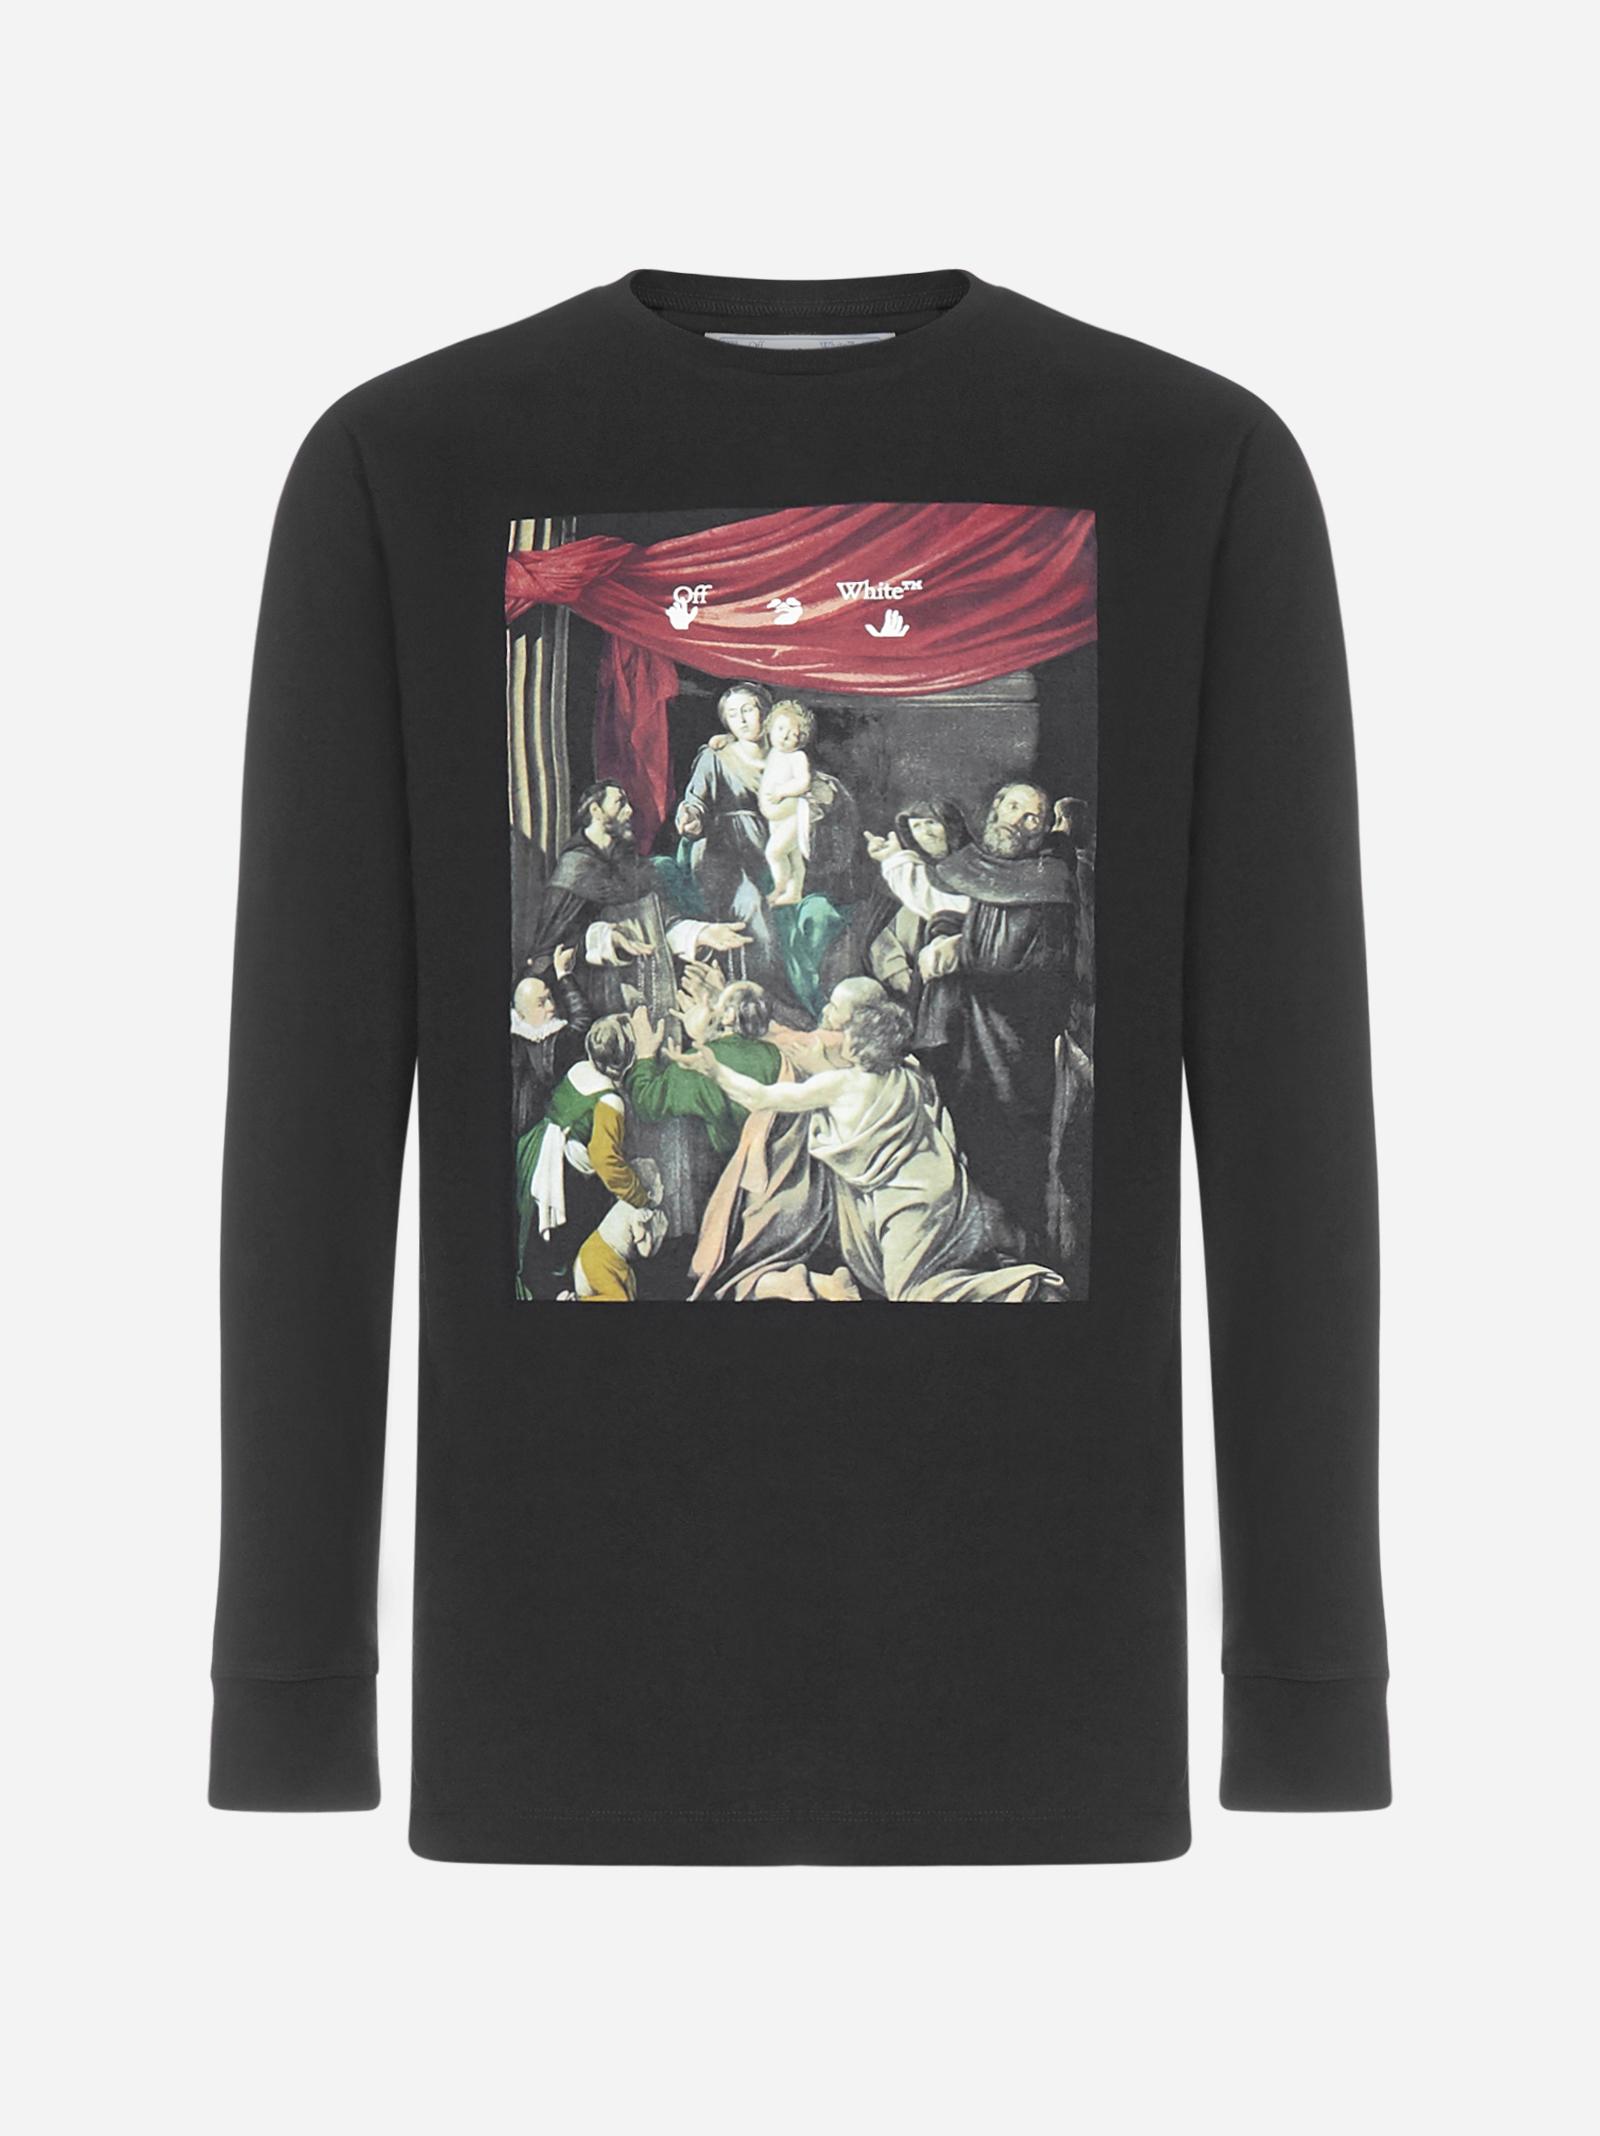 Off-White c/o Virgil Abloh Caravaggio Painting Long Sleeves Cotton T-shirt in Gray for Men - Lyst